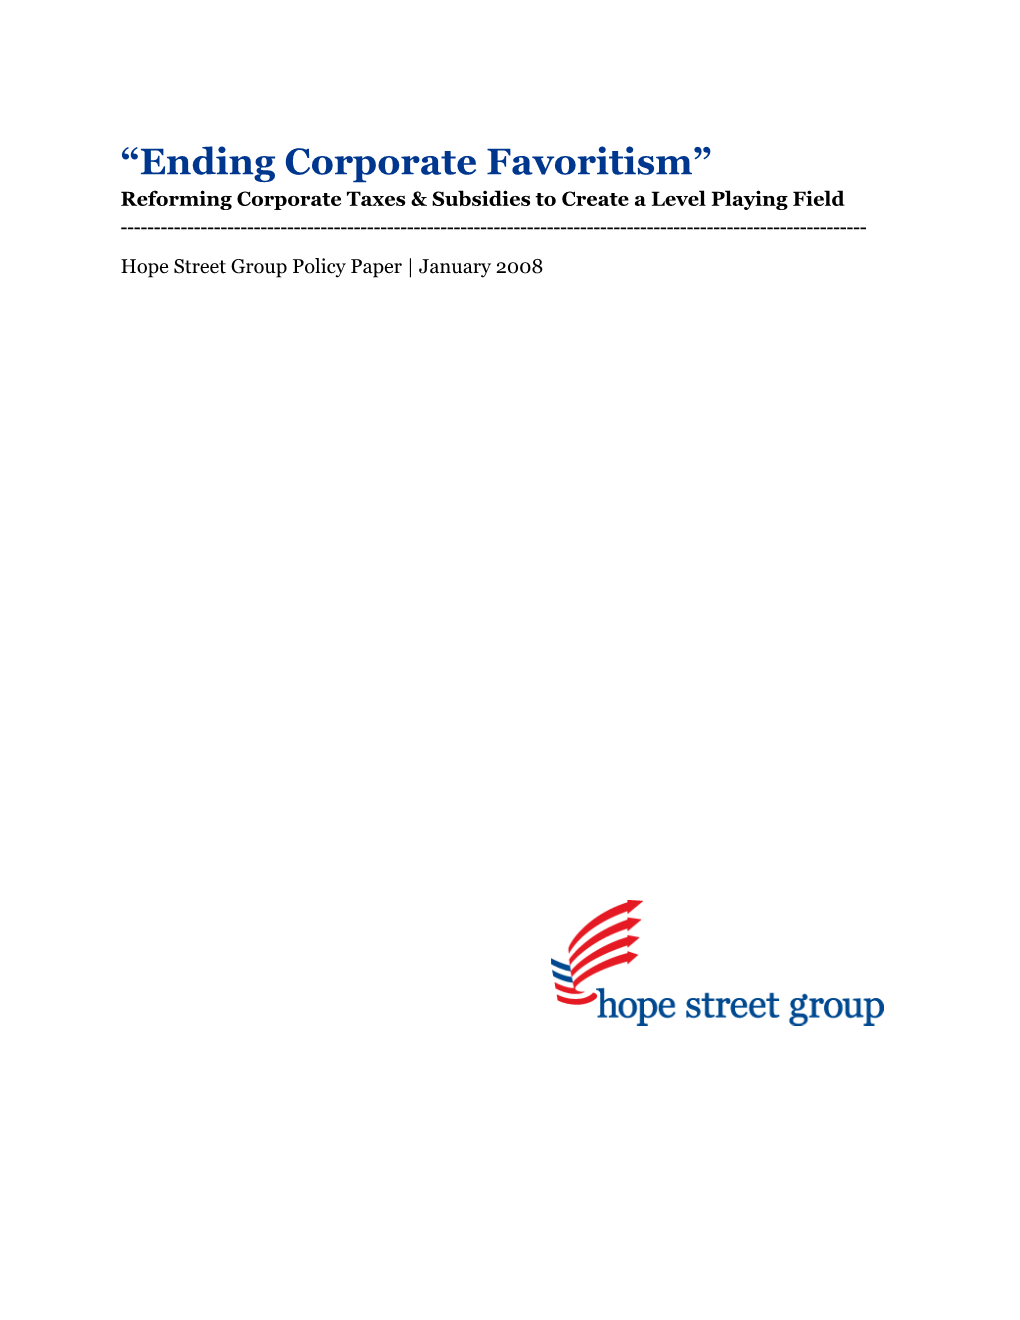 “Ending Corporate Favoritism” Reforming Corporate Taxes & Subsidies to Create a Level Playing Field ------Hope Street Group Policy Paper | January 2008